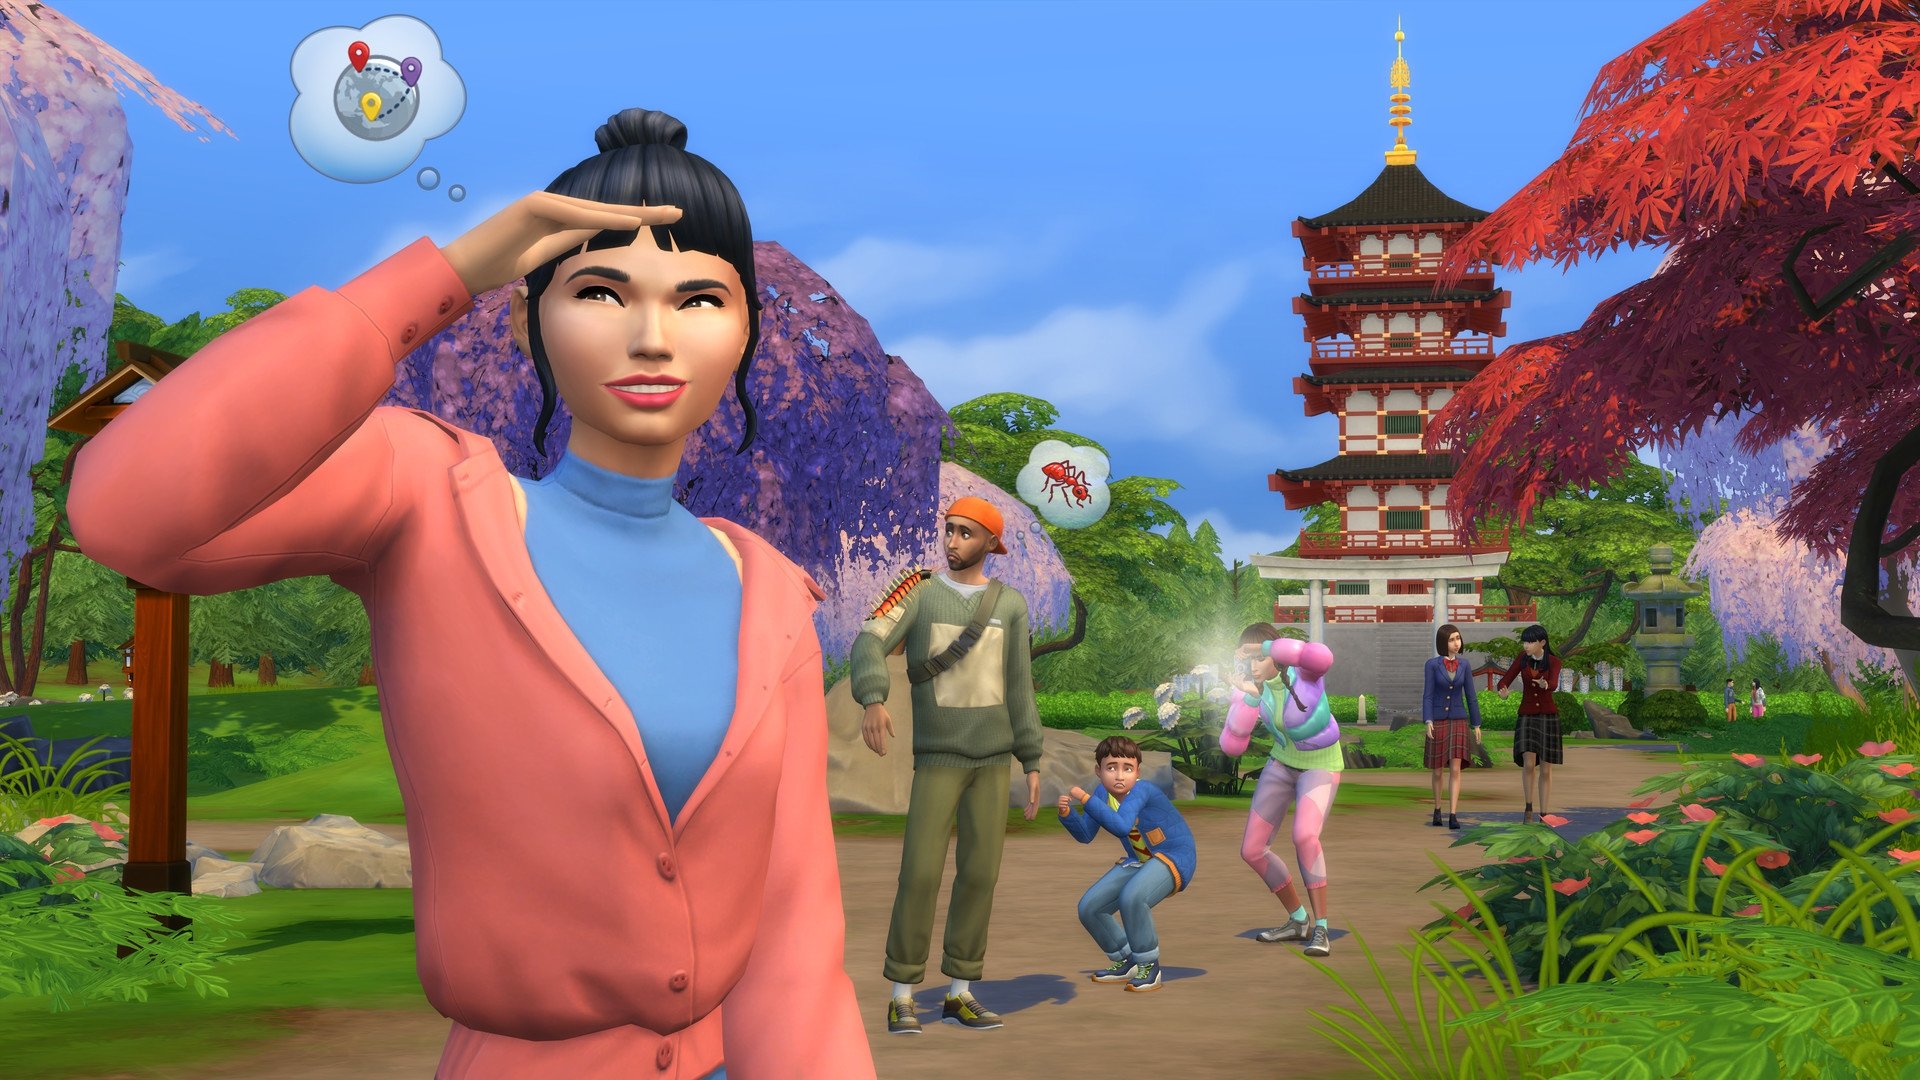 The Sims 4: Snowy Escape Gameplay Showcase Stream Takes Place On October 30